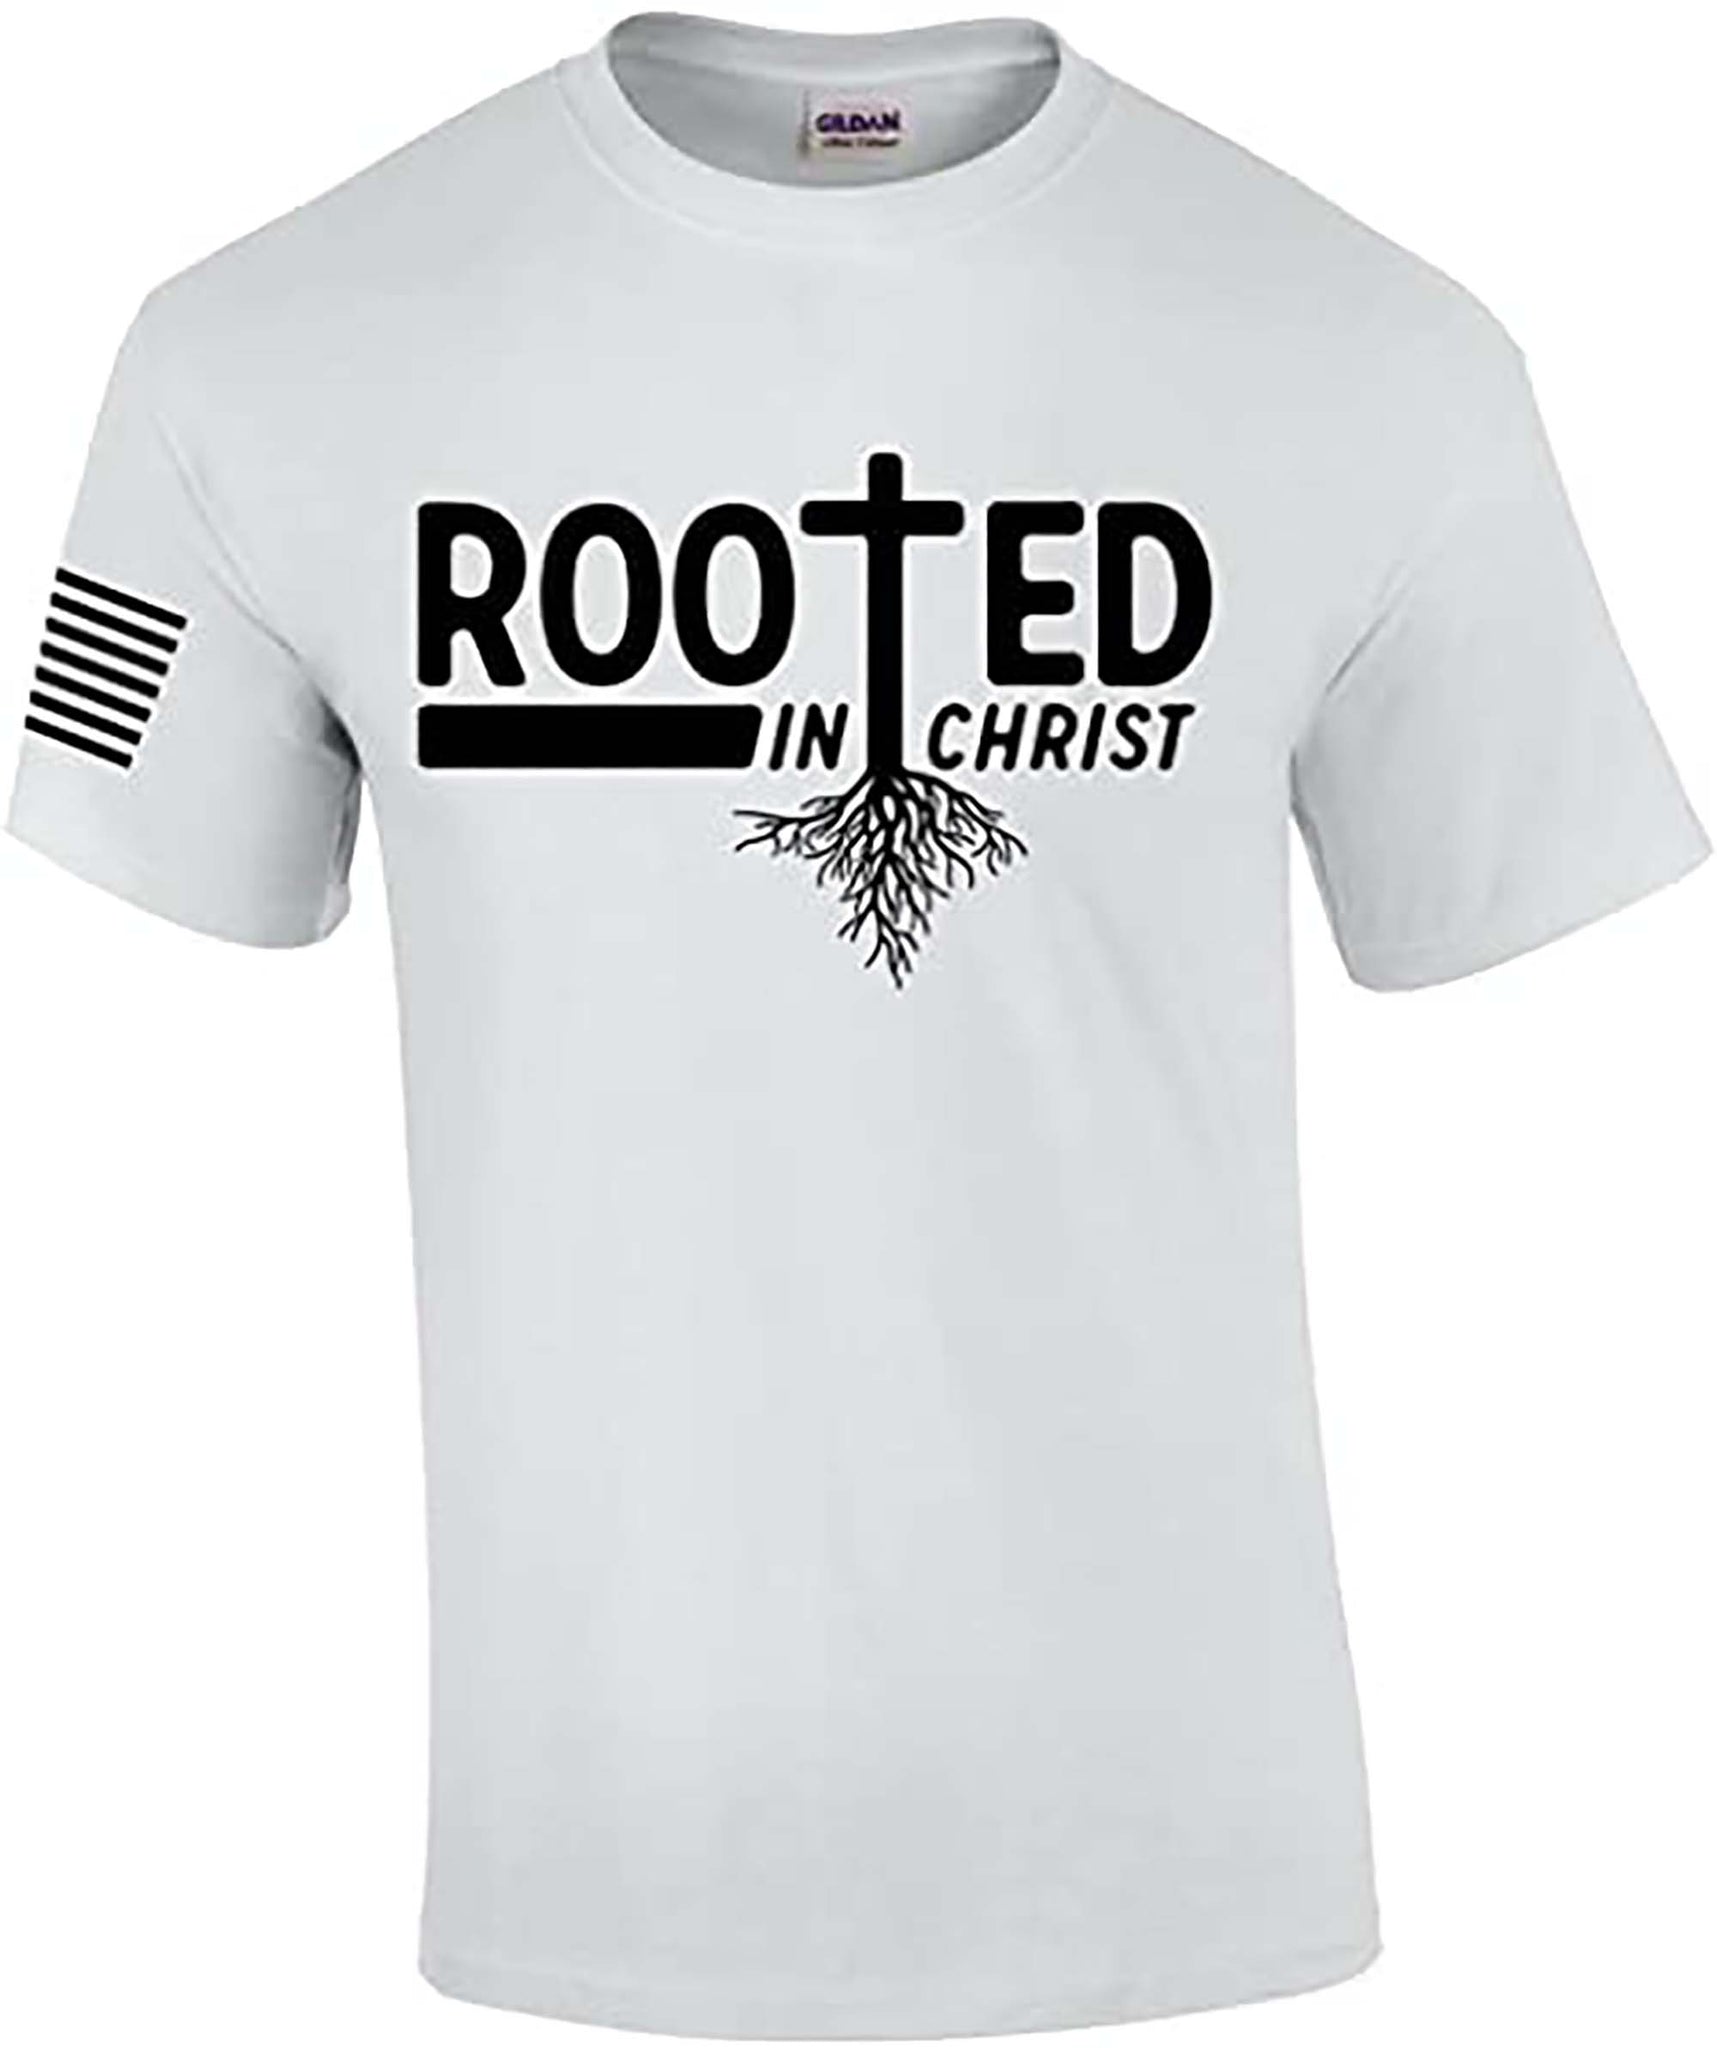 Rooted in Christ Tree Roots Mens Christian Short Sleeve T-Shirt Graphic Tee-white